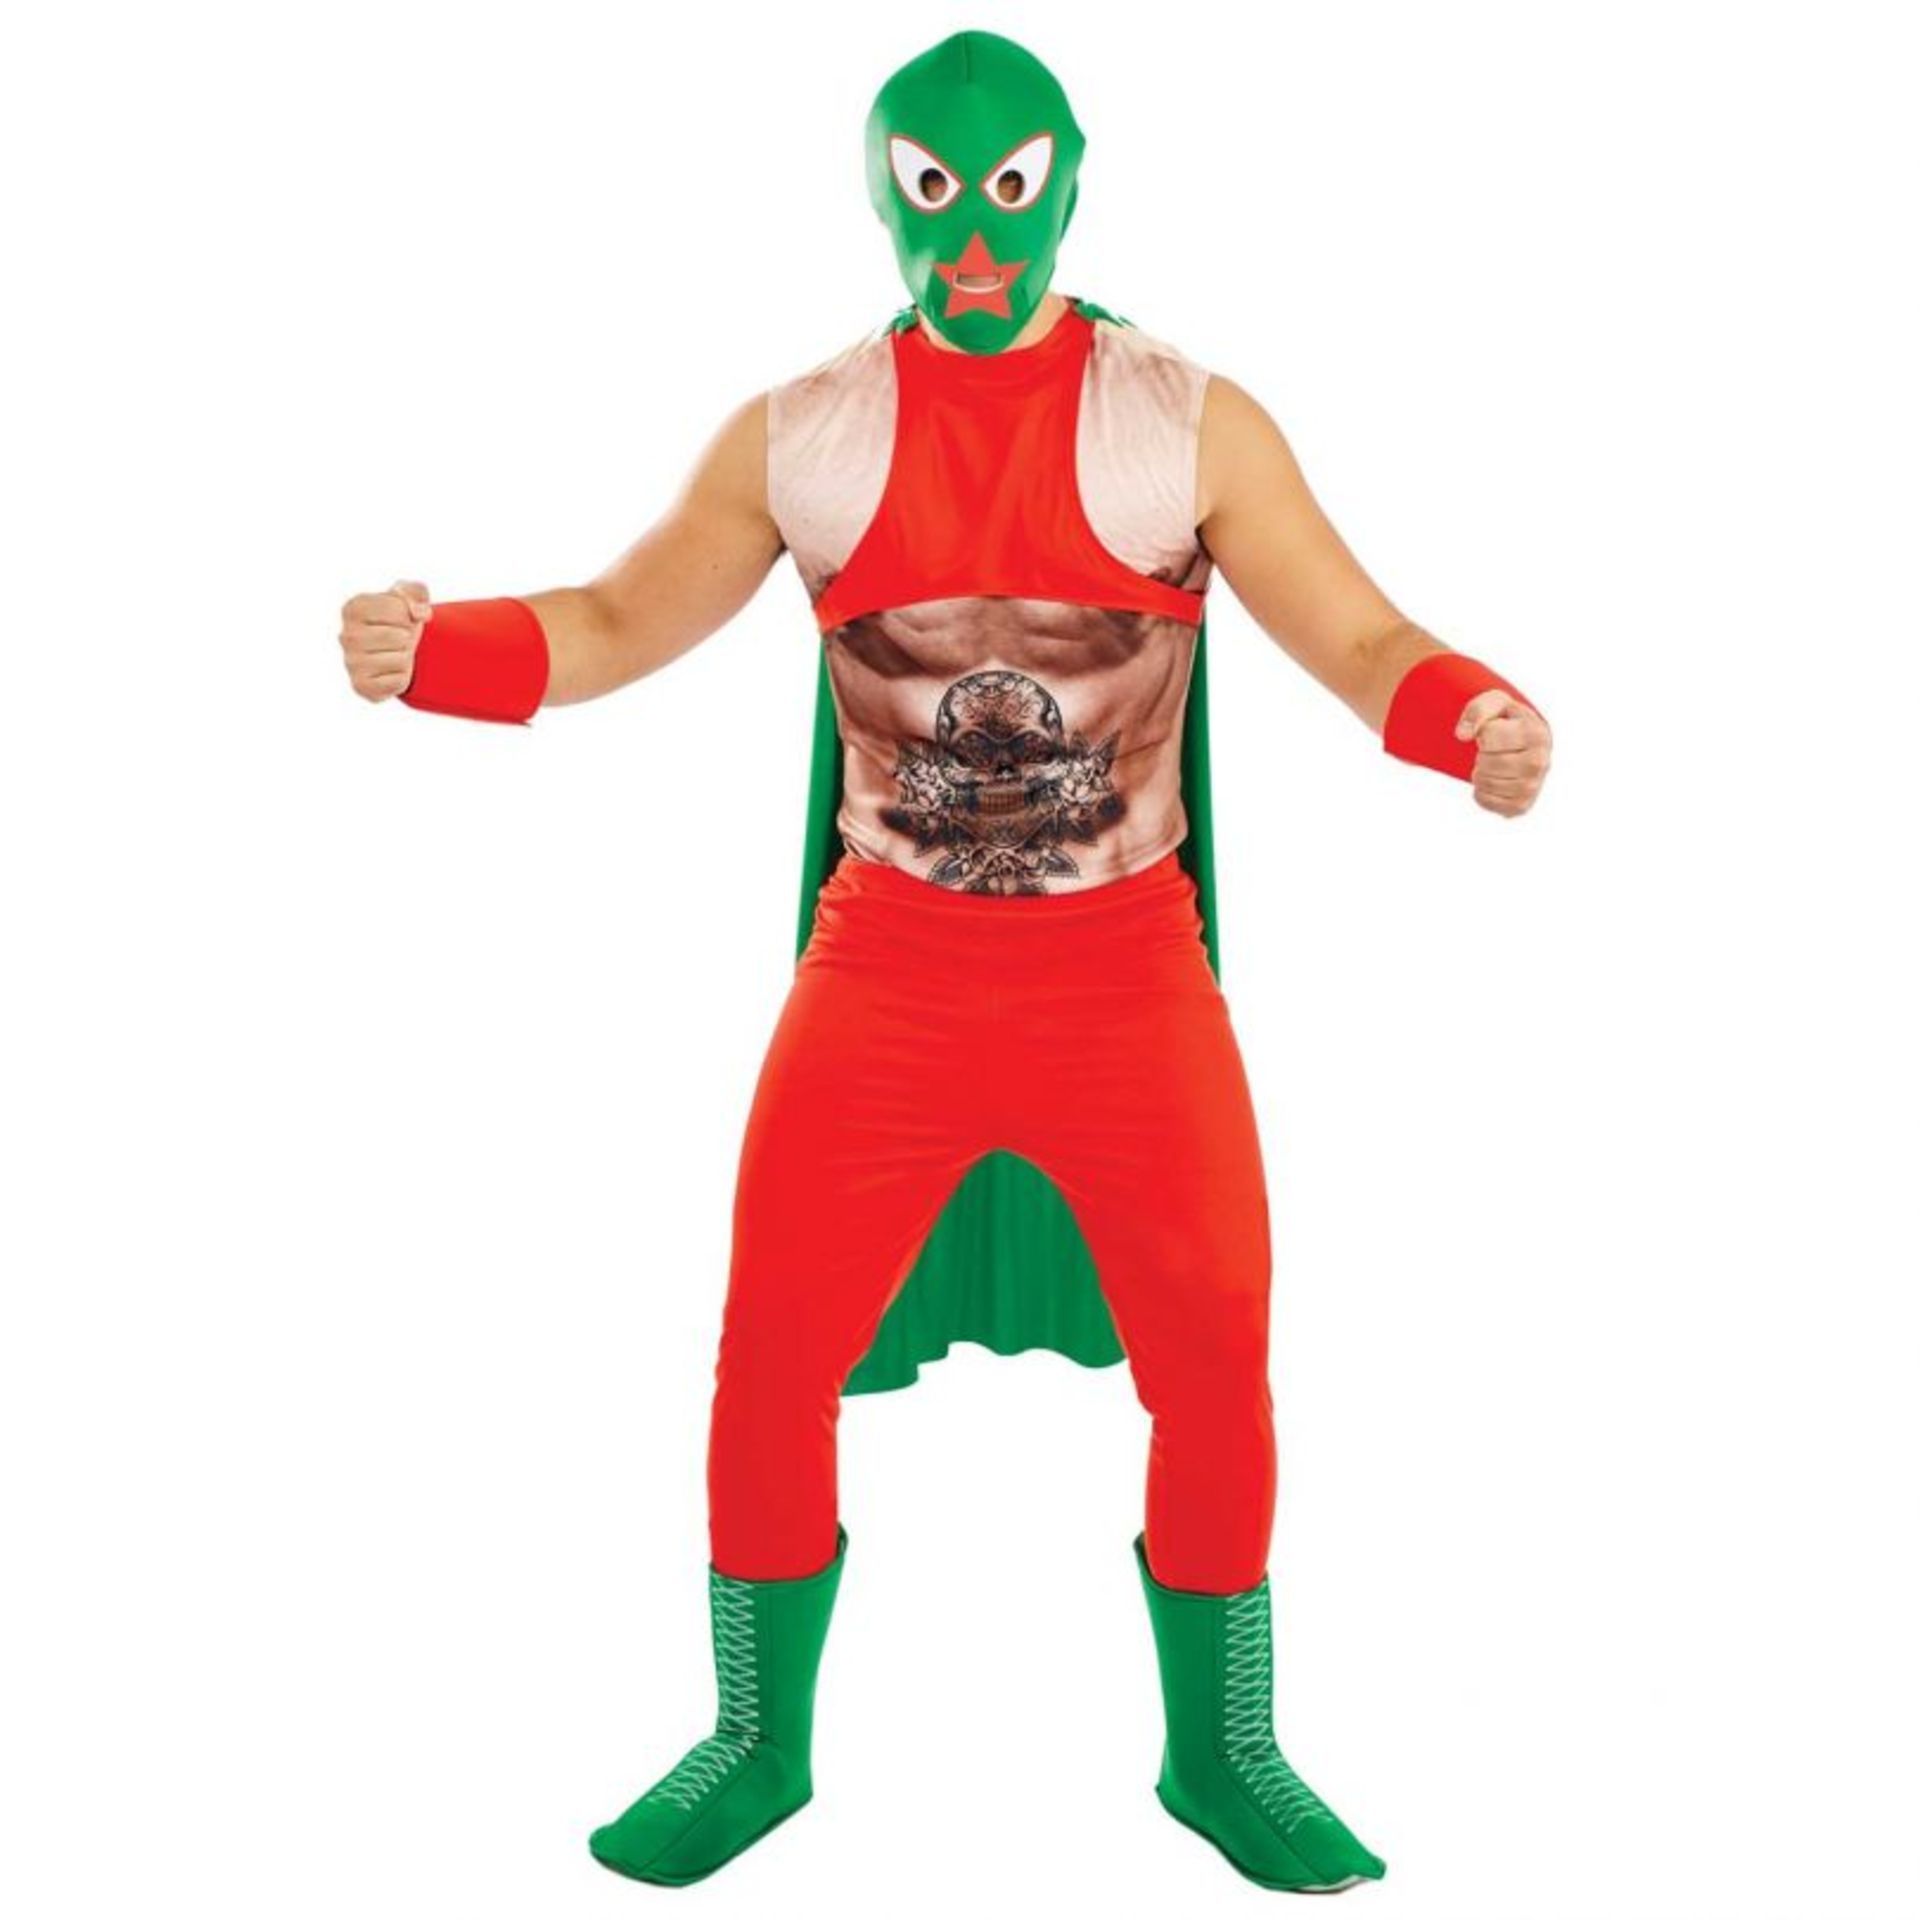 15 X BRAND NEW MEXICAN WRESTLER FANCY DRESS COSTUMES IN VARIOUS SIZES R10-12